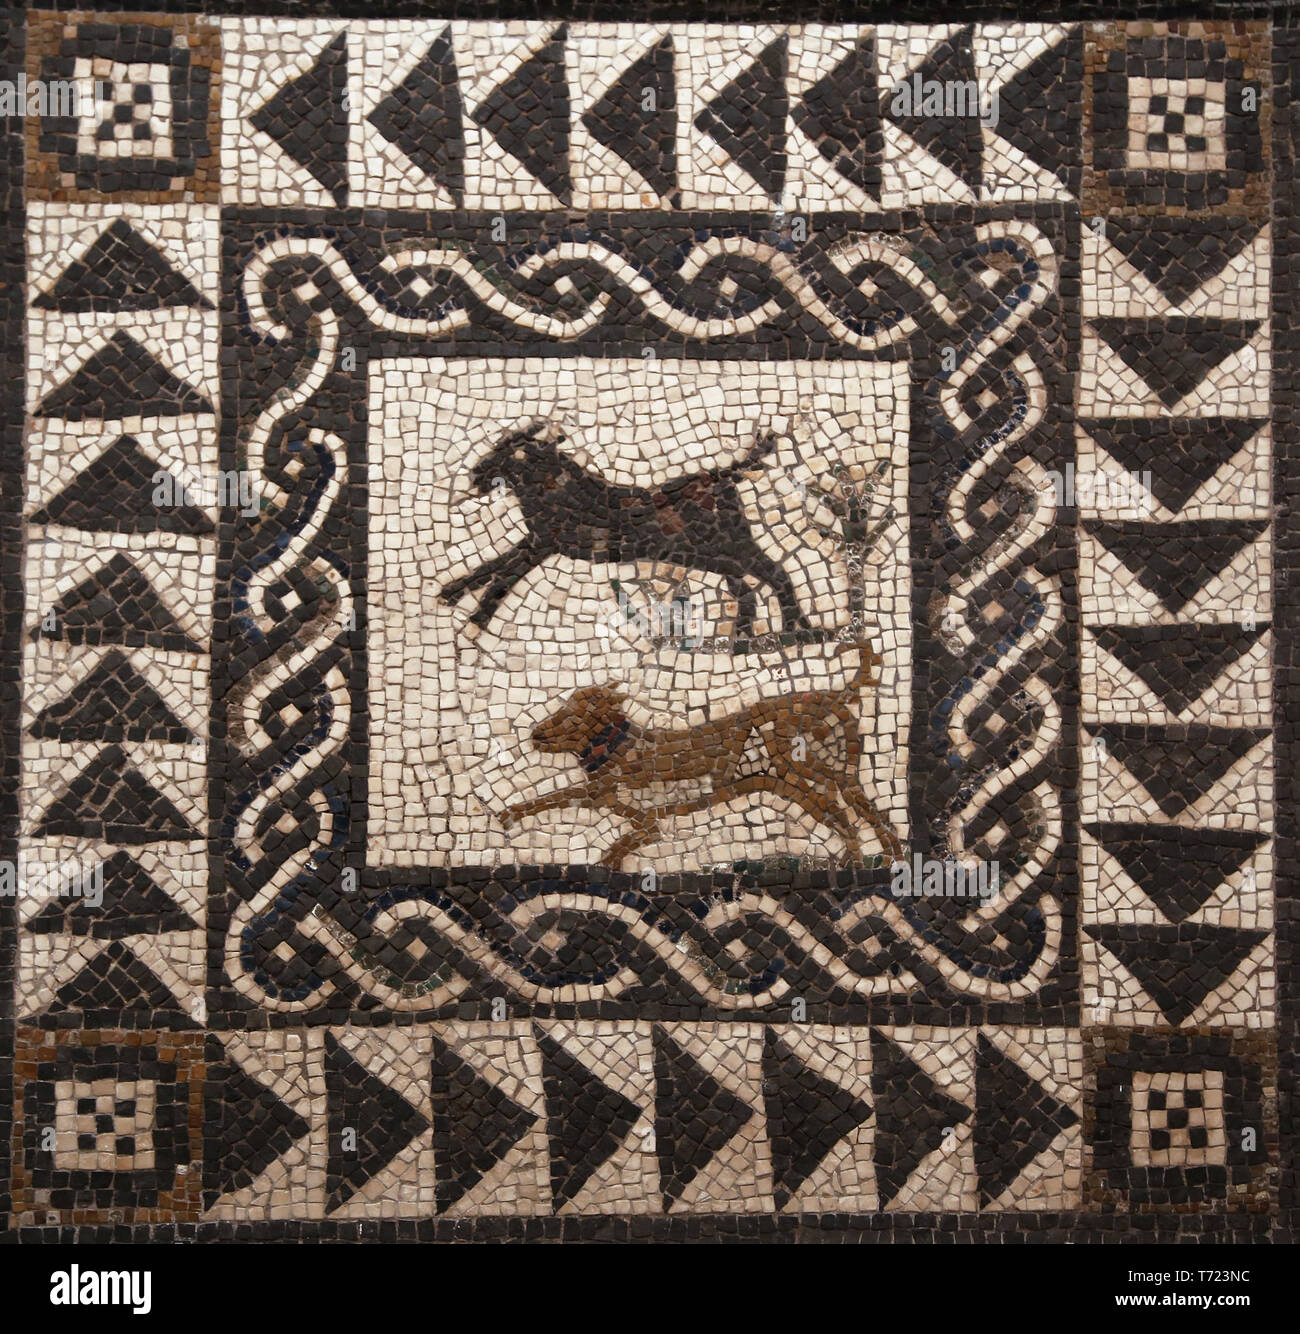 'Opus Tessellatum' mosaic. Sevilla, Andalusia, Spain. 2nd-3rd century, Archaeological Museum of Seville. Andalusia. Spain. Stock Photo